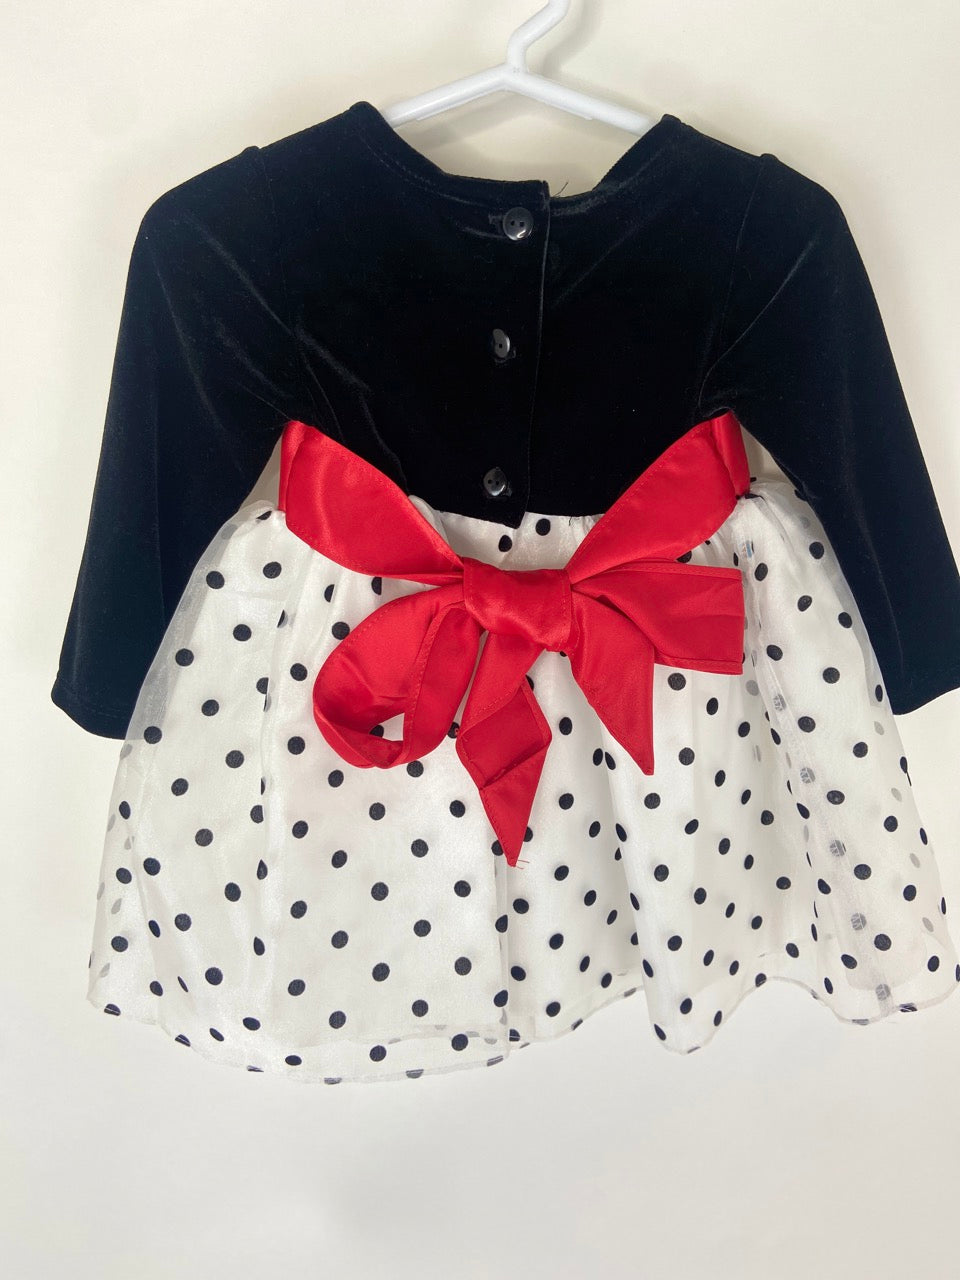 Black and White Polka-dot Holiday Dress - 12 Months